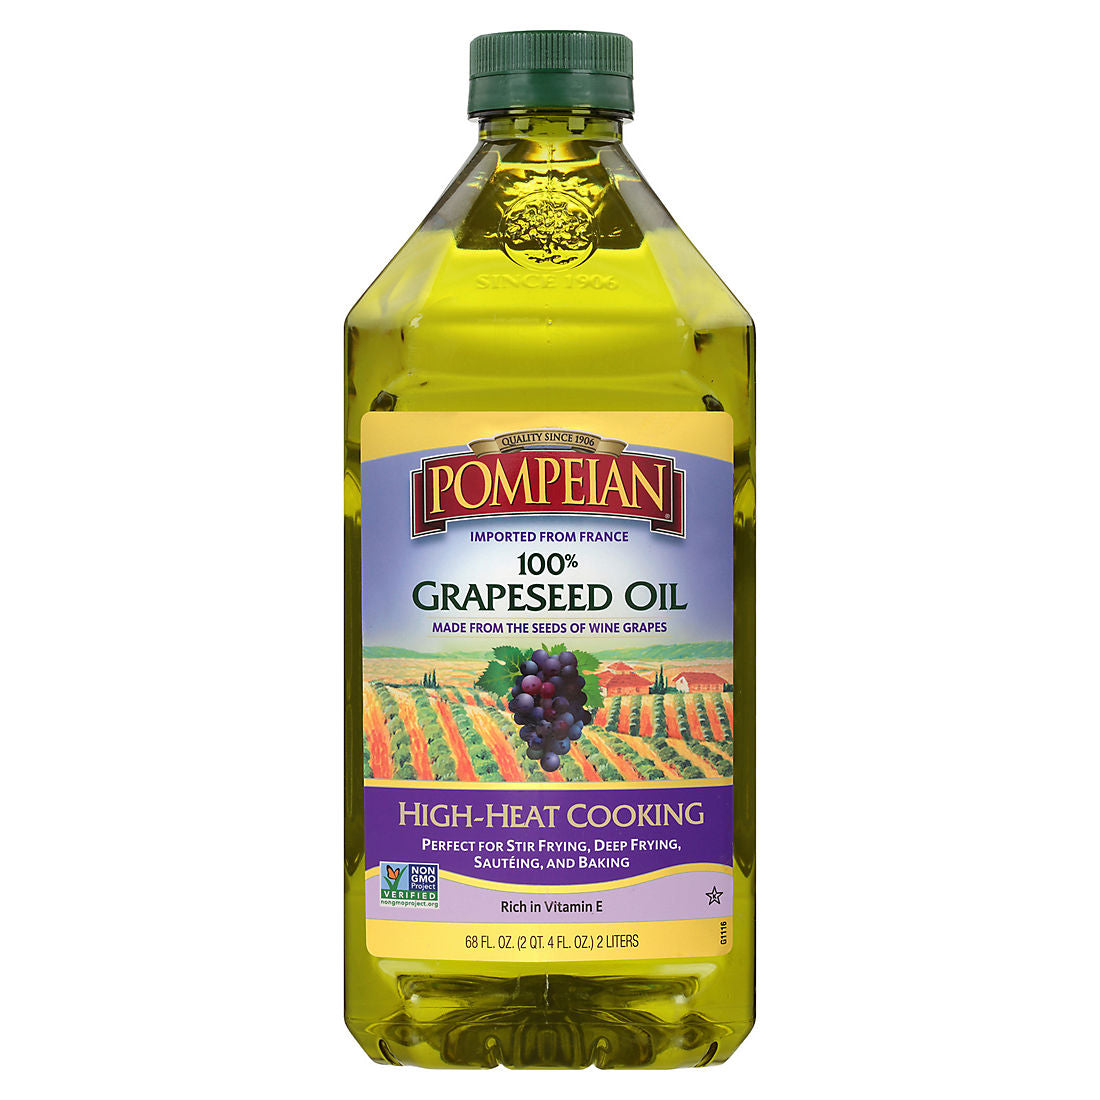 Pompeian 100% Grapeseed Oil For High-Heat Cooking, 68 fl. oz.